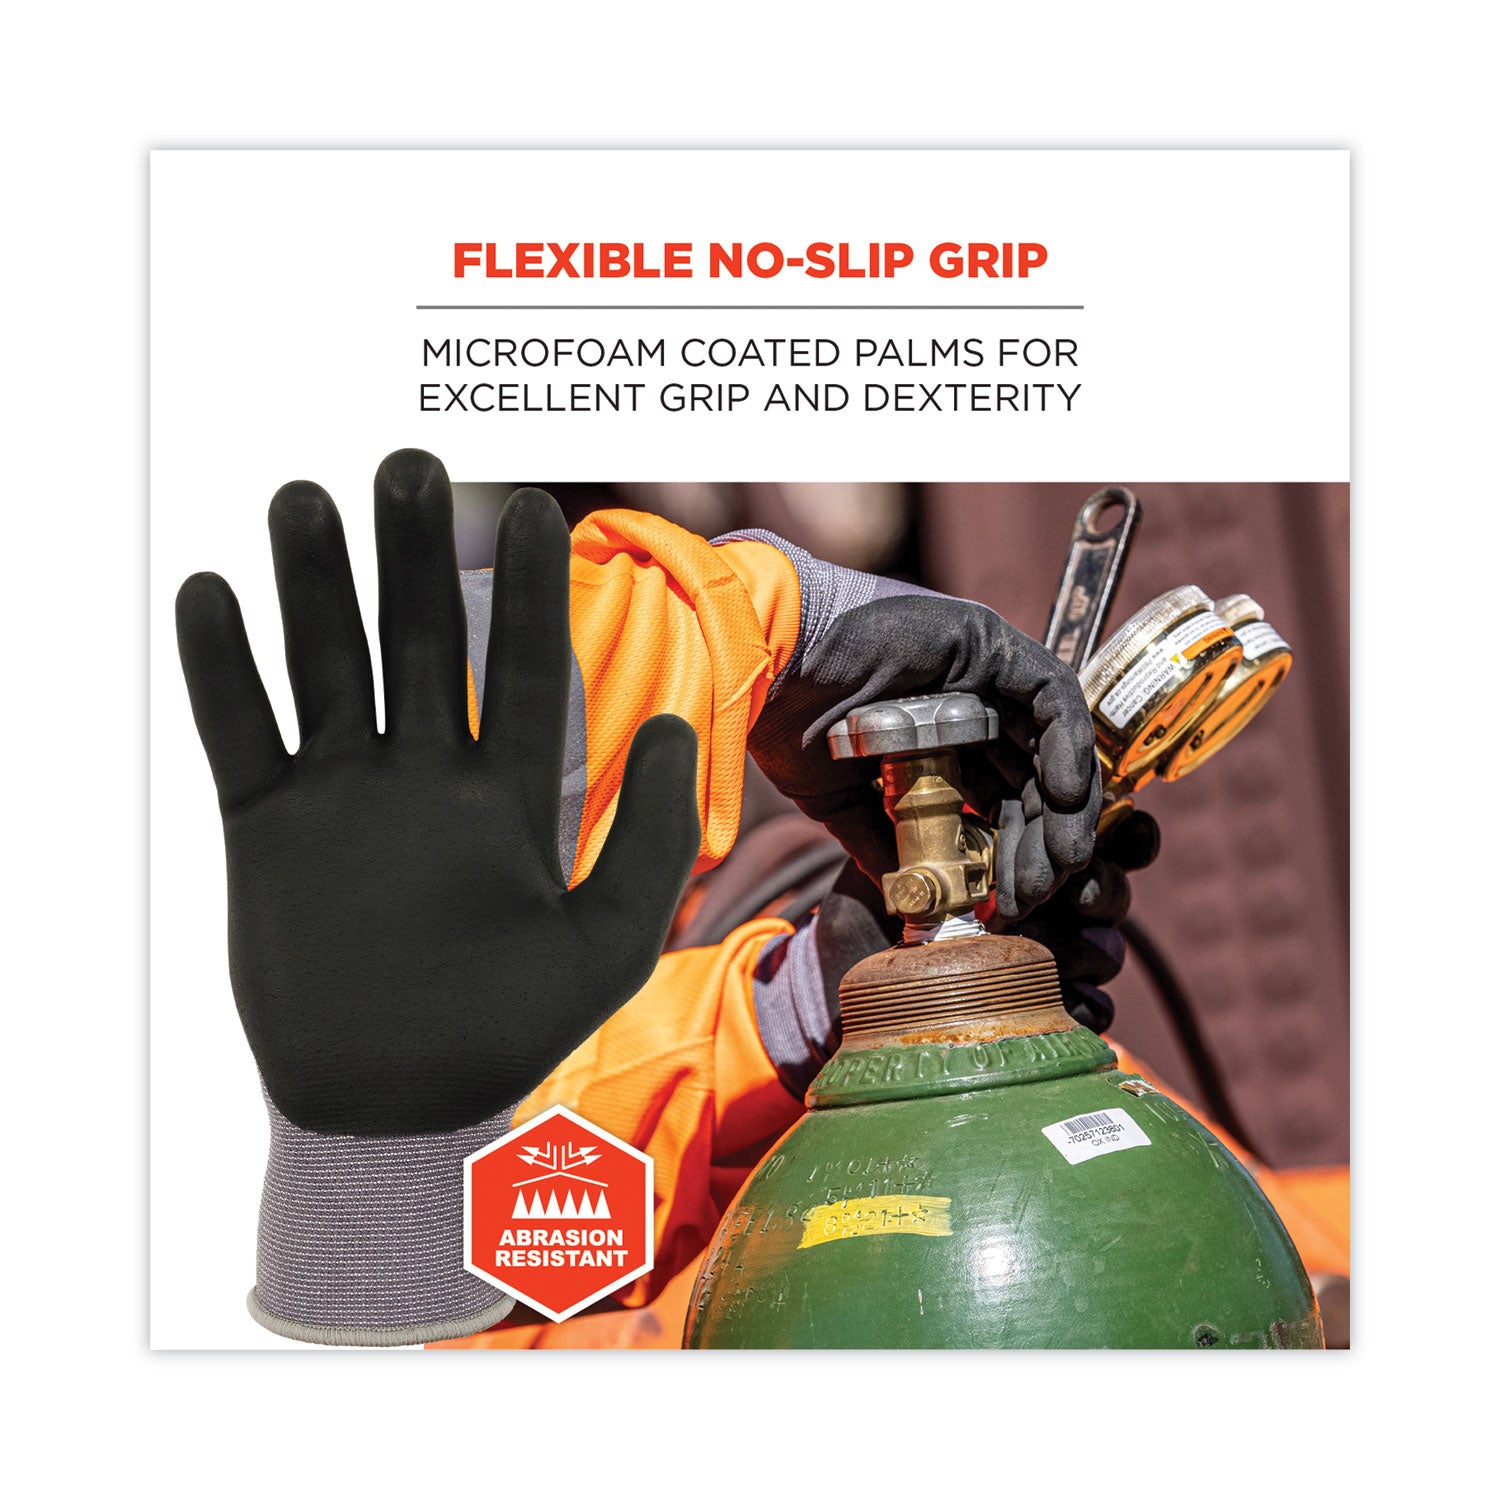 proflex-7000-nitrile-coated-gloves-microfoam-palm-gray-large-12-pairs-pack-ships-in-1-3-business-days_ego10364 - 2